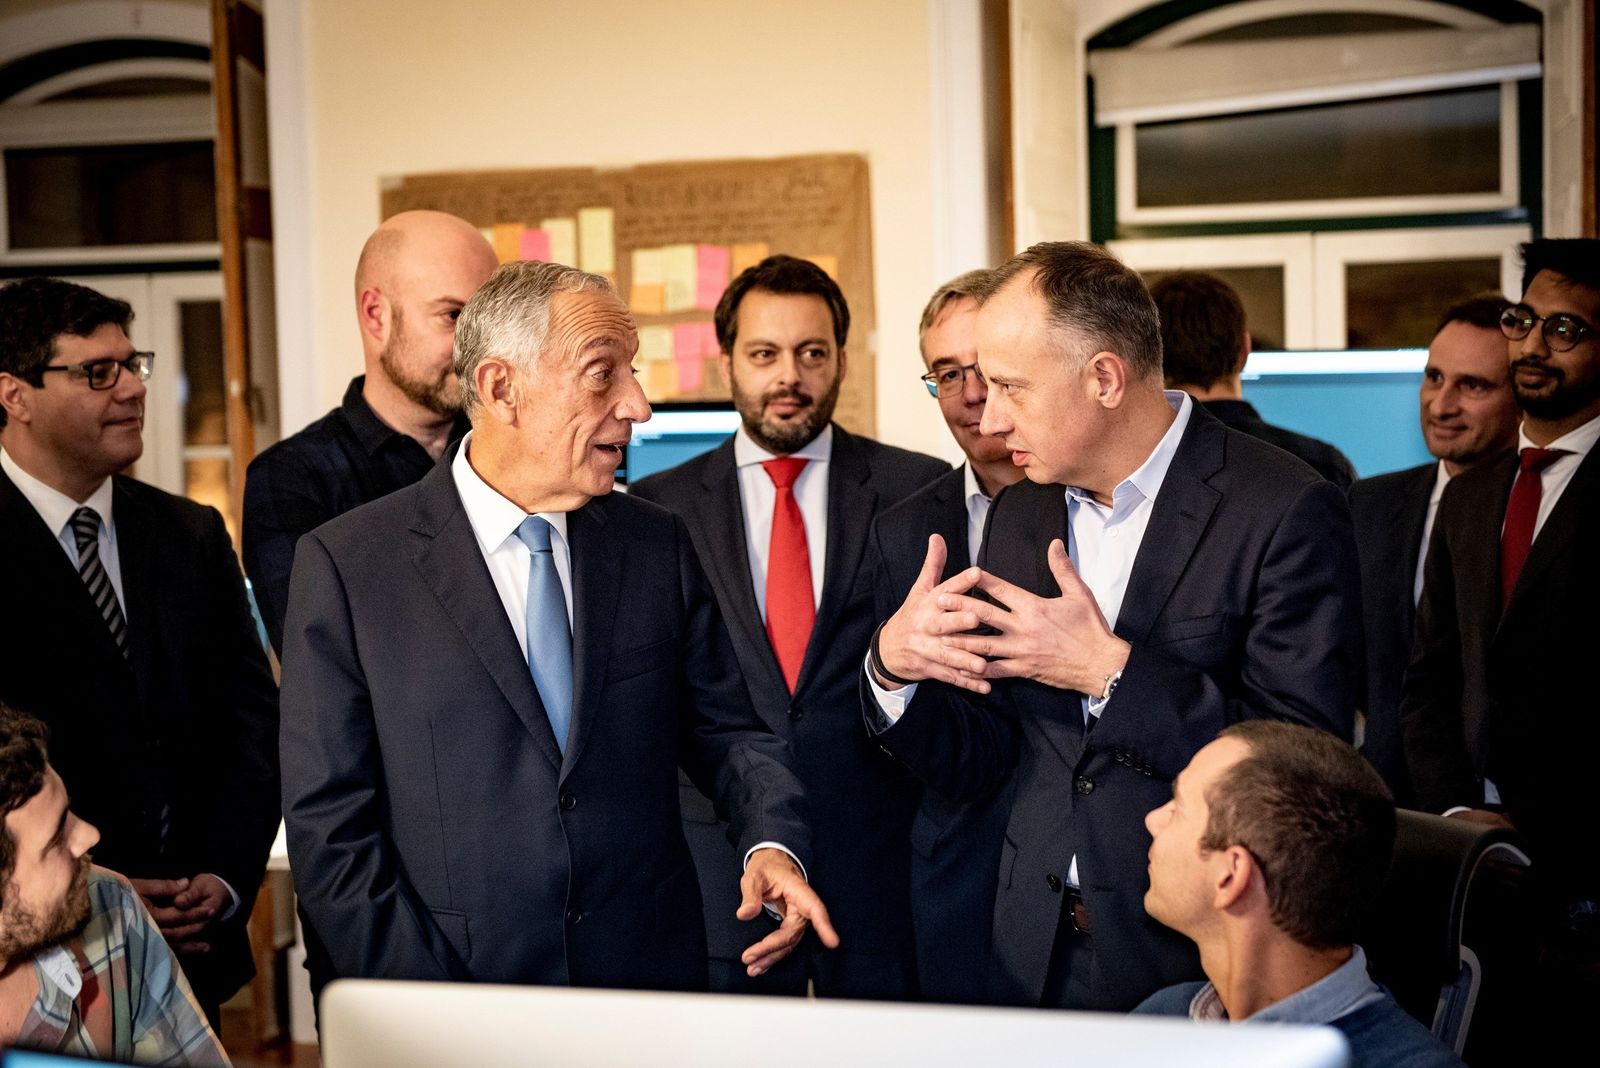 New IT center in Lisbon for the Volkswagen Group